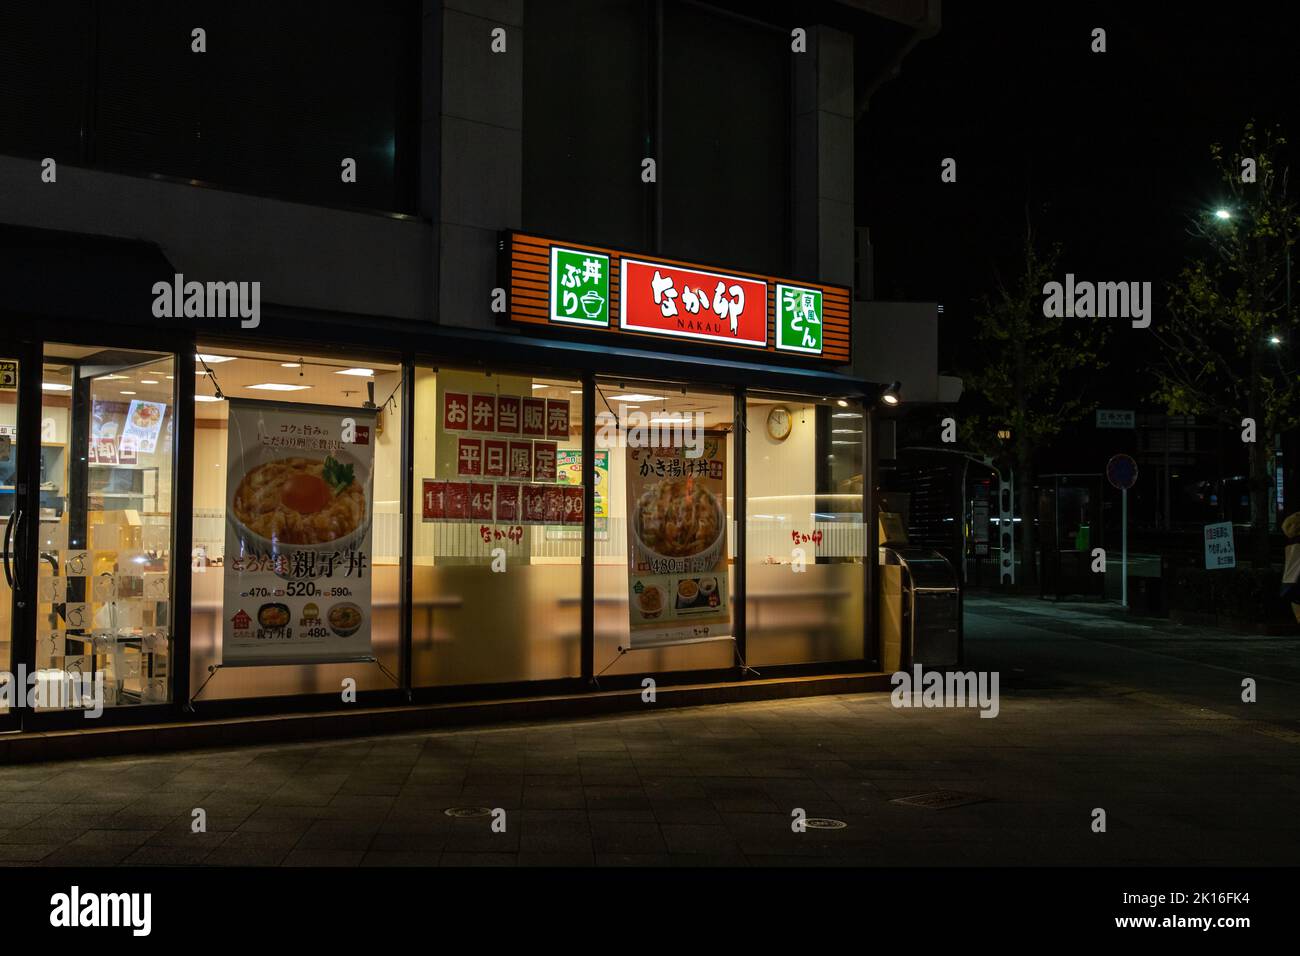 Kyoto, JAPAN - Dec 3 2021 : Store front of Nakau at night. Nakau is a popular Japanese fast food restaurant chain Stock Photo